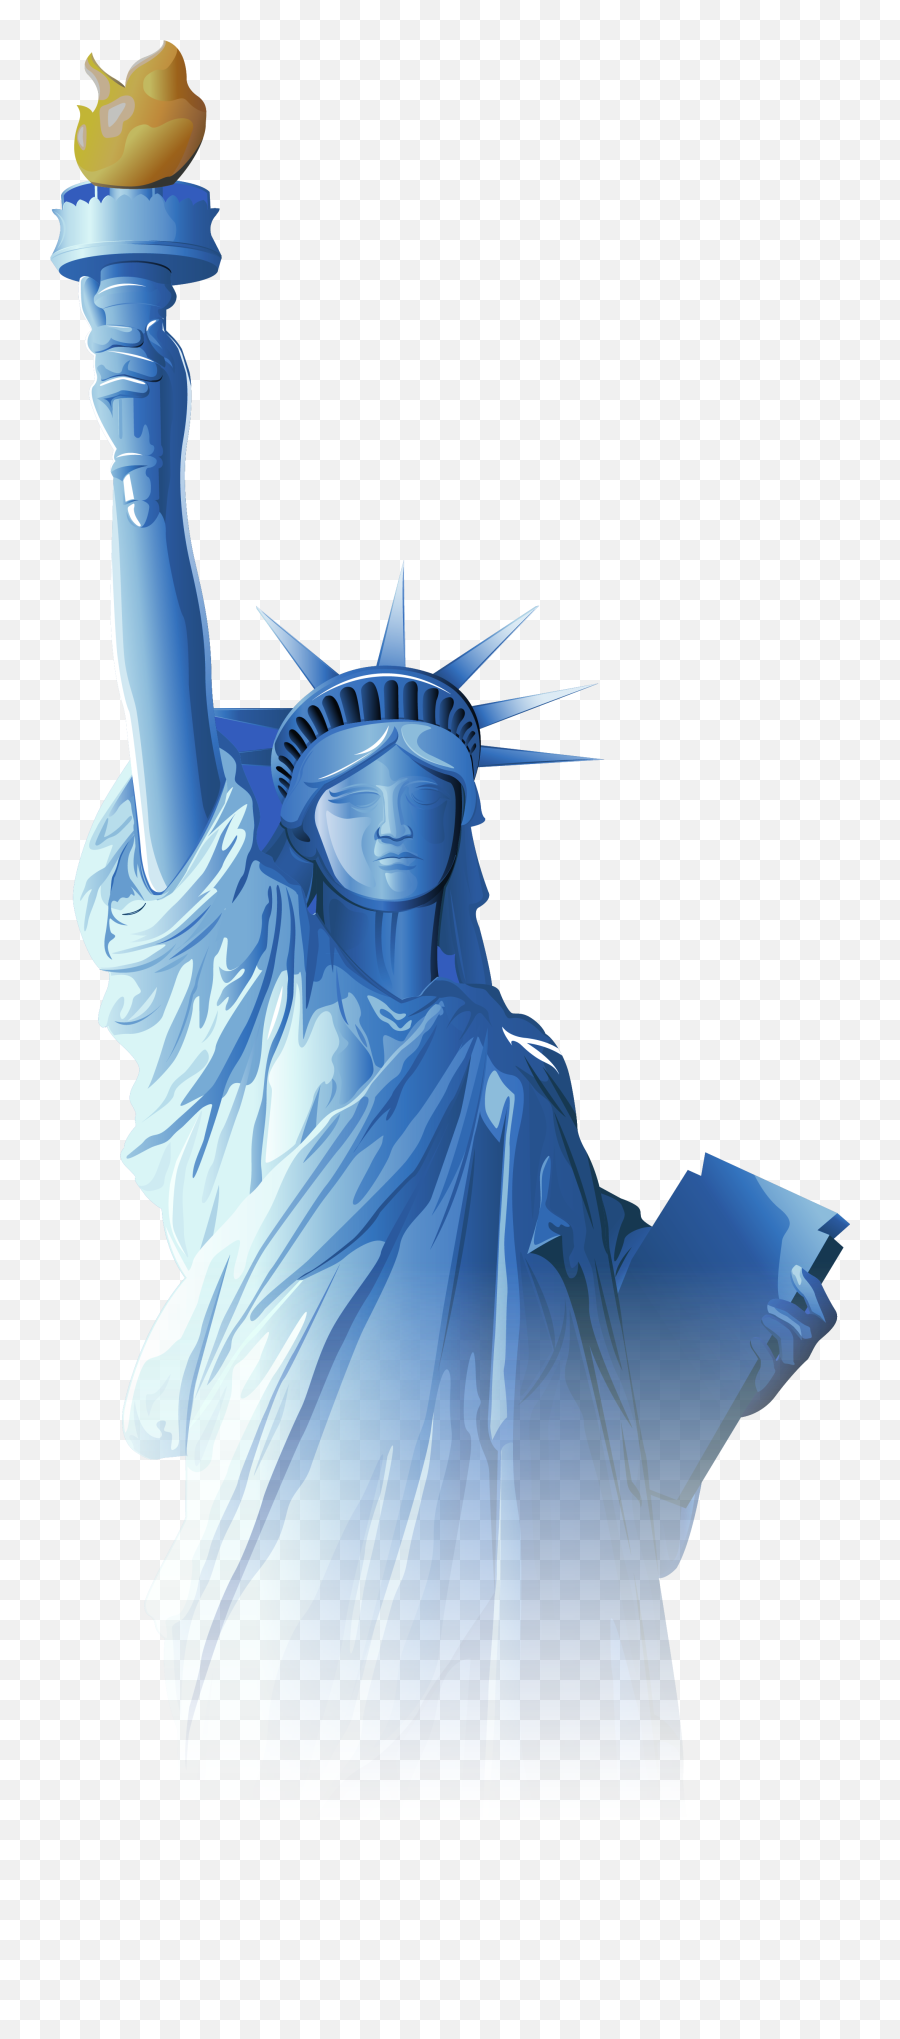 Statue Of Liberty Png Background Image Png Arts Emoji,Statue Of Liberty Emoji